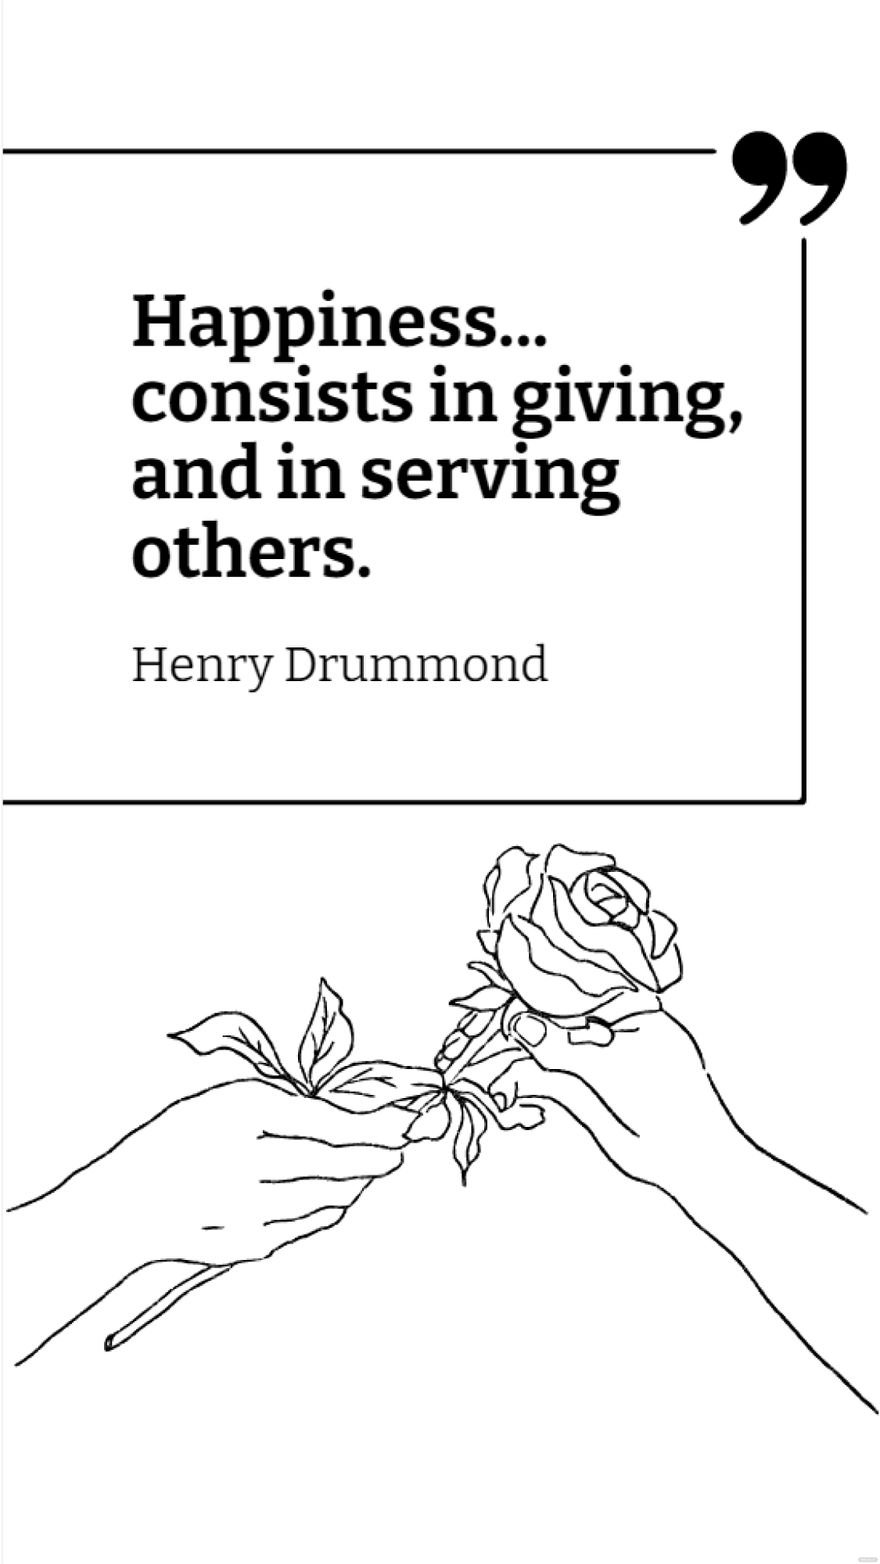 Free Henry Drummond - Happiness... consists in giving, and in serving others. in JPG